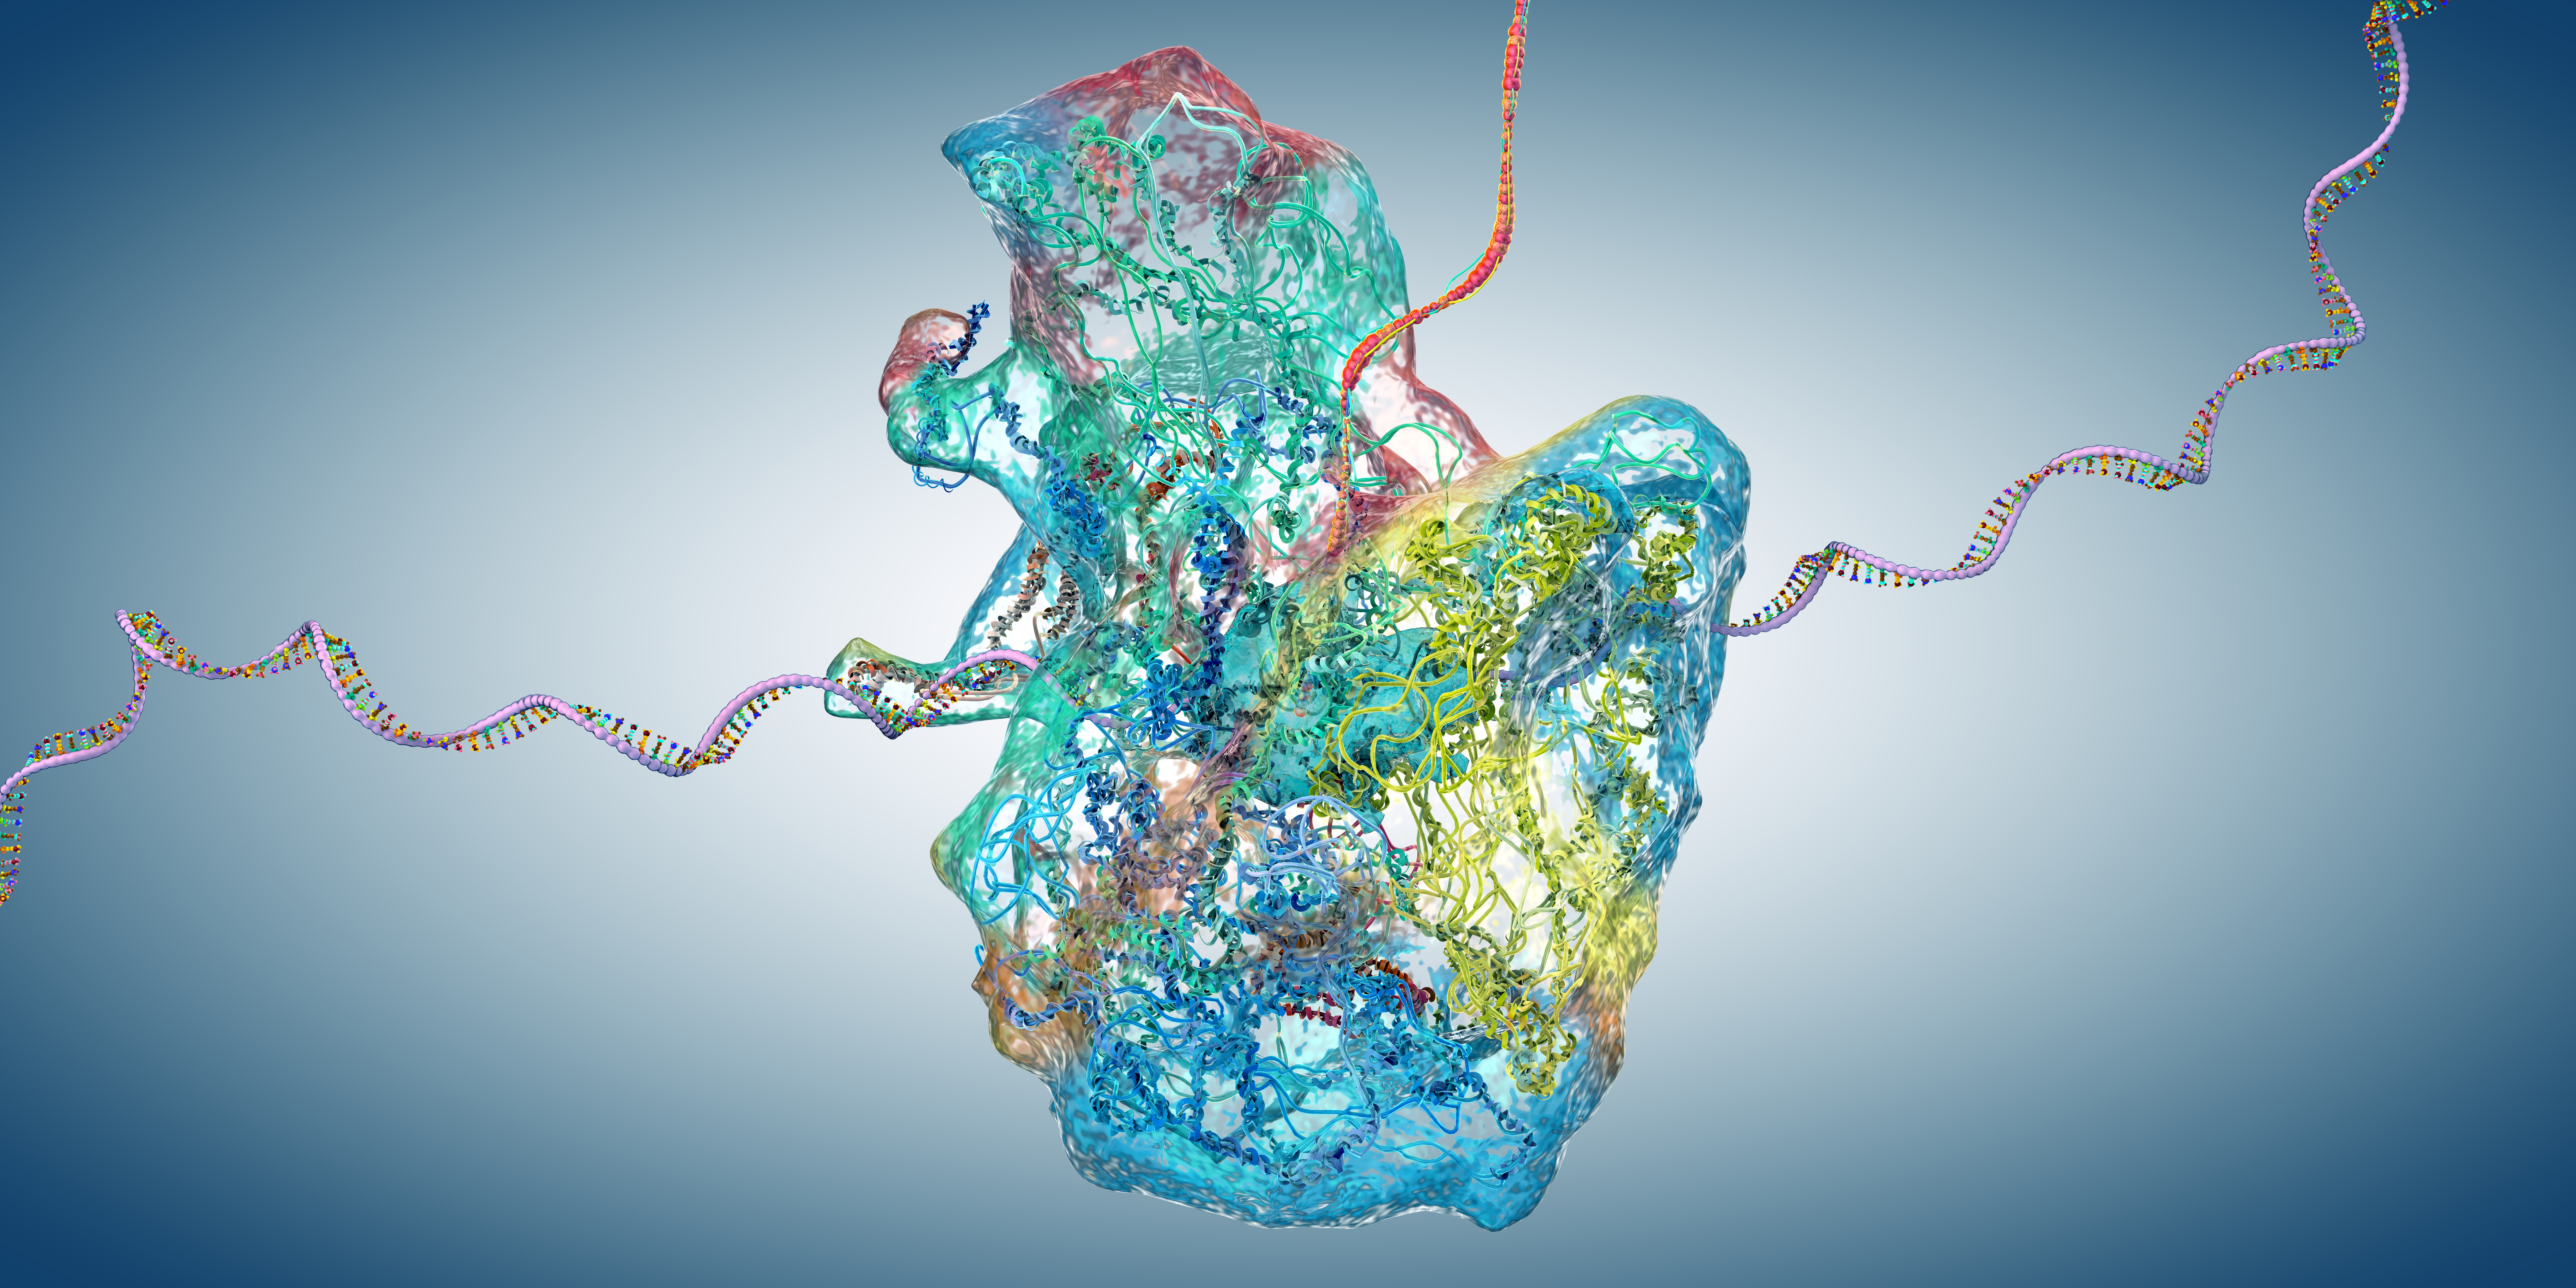 Ribosome as part of an biological cell constructing mRNA molecule